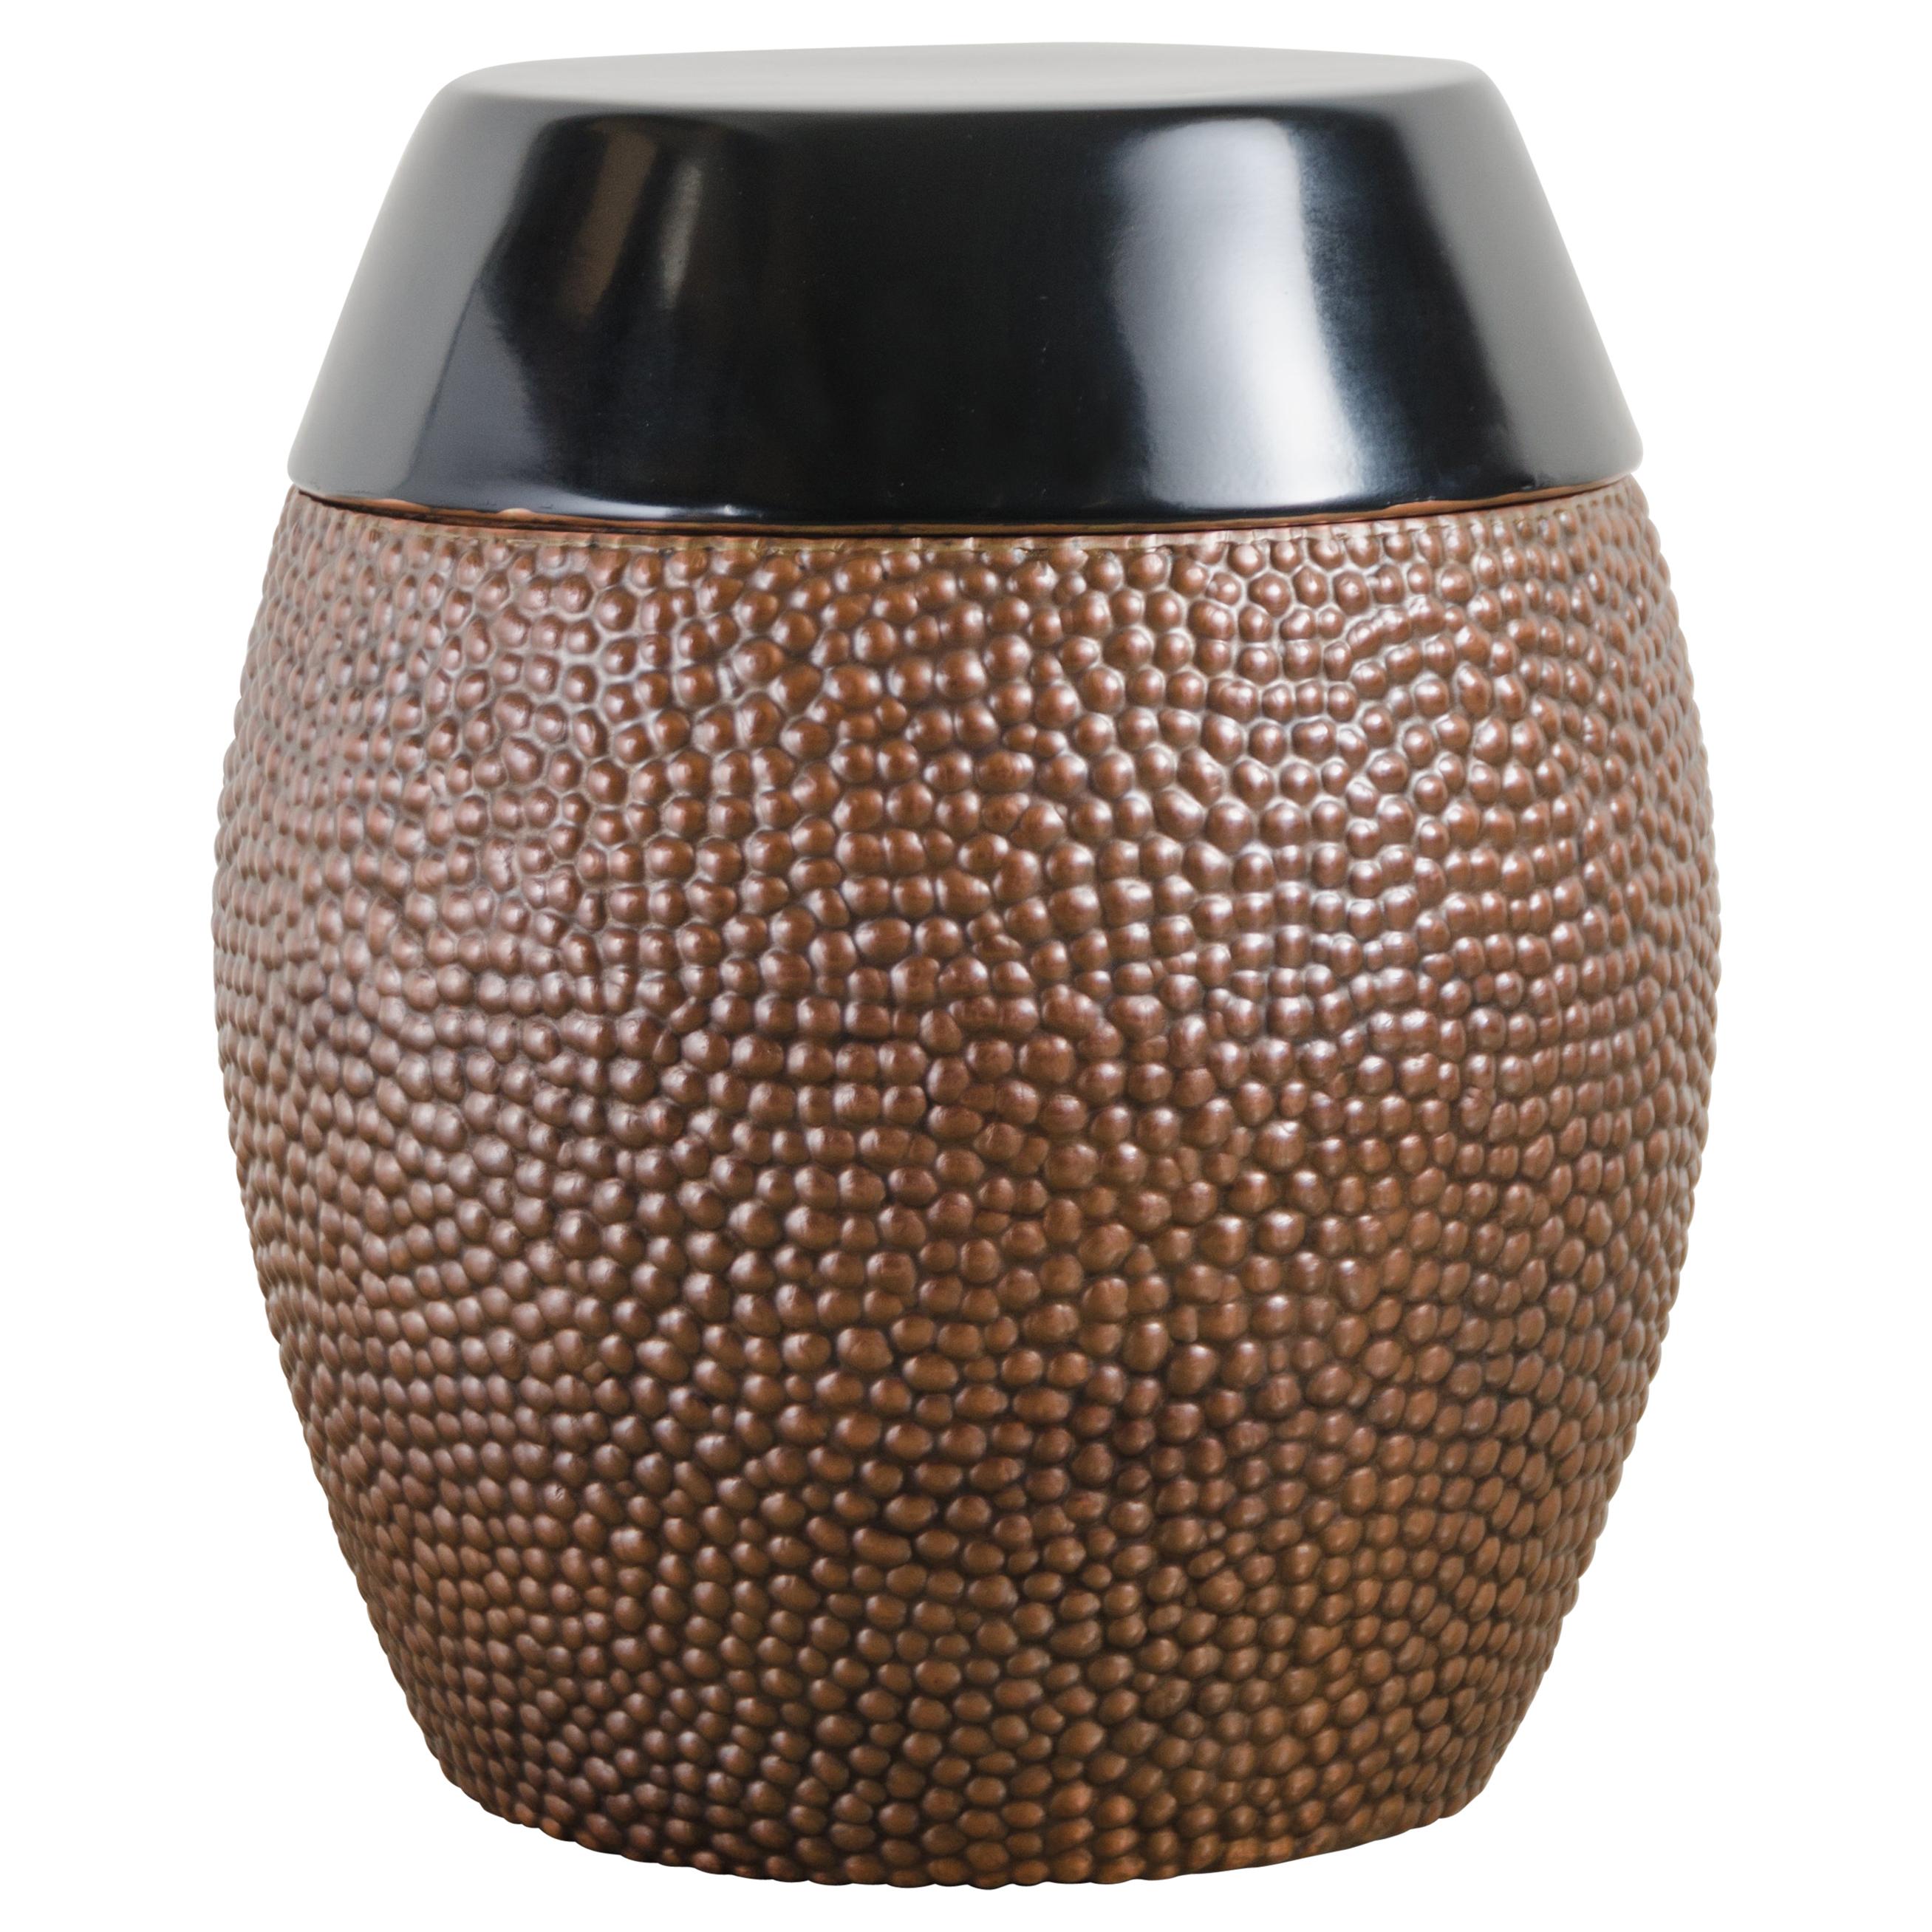 Toad Skin Barrel Storage Drum Stool, Copper and Black Lacquer by Robert Kuo For Sale